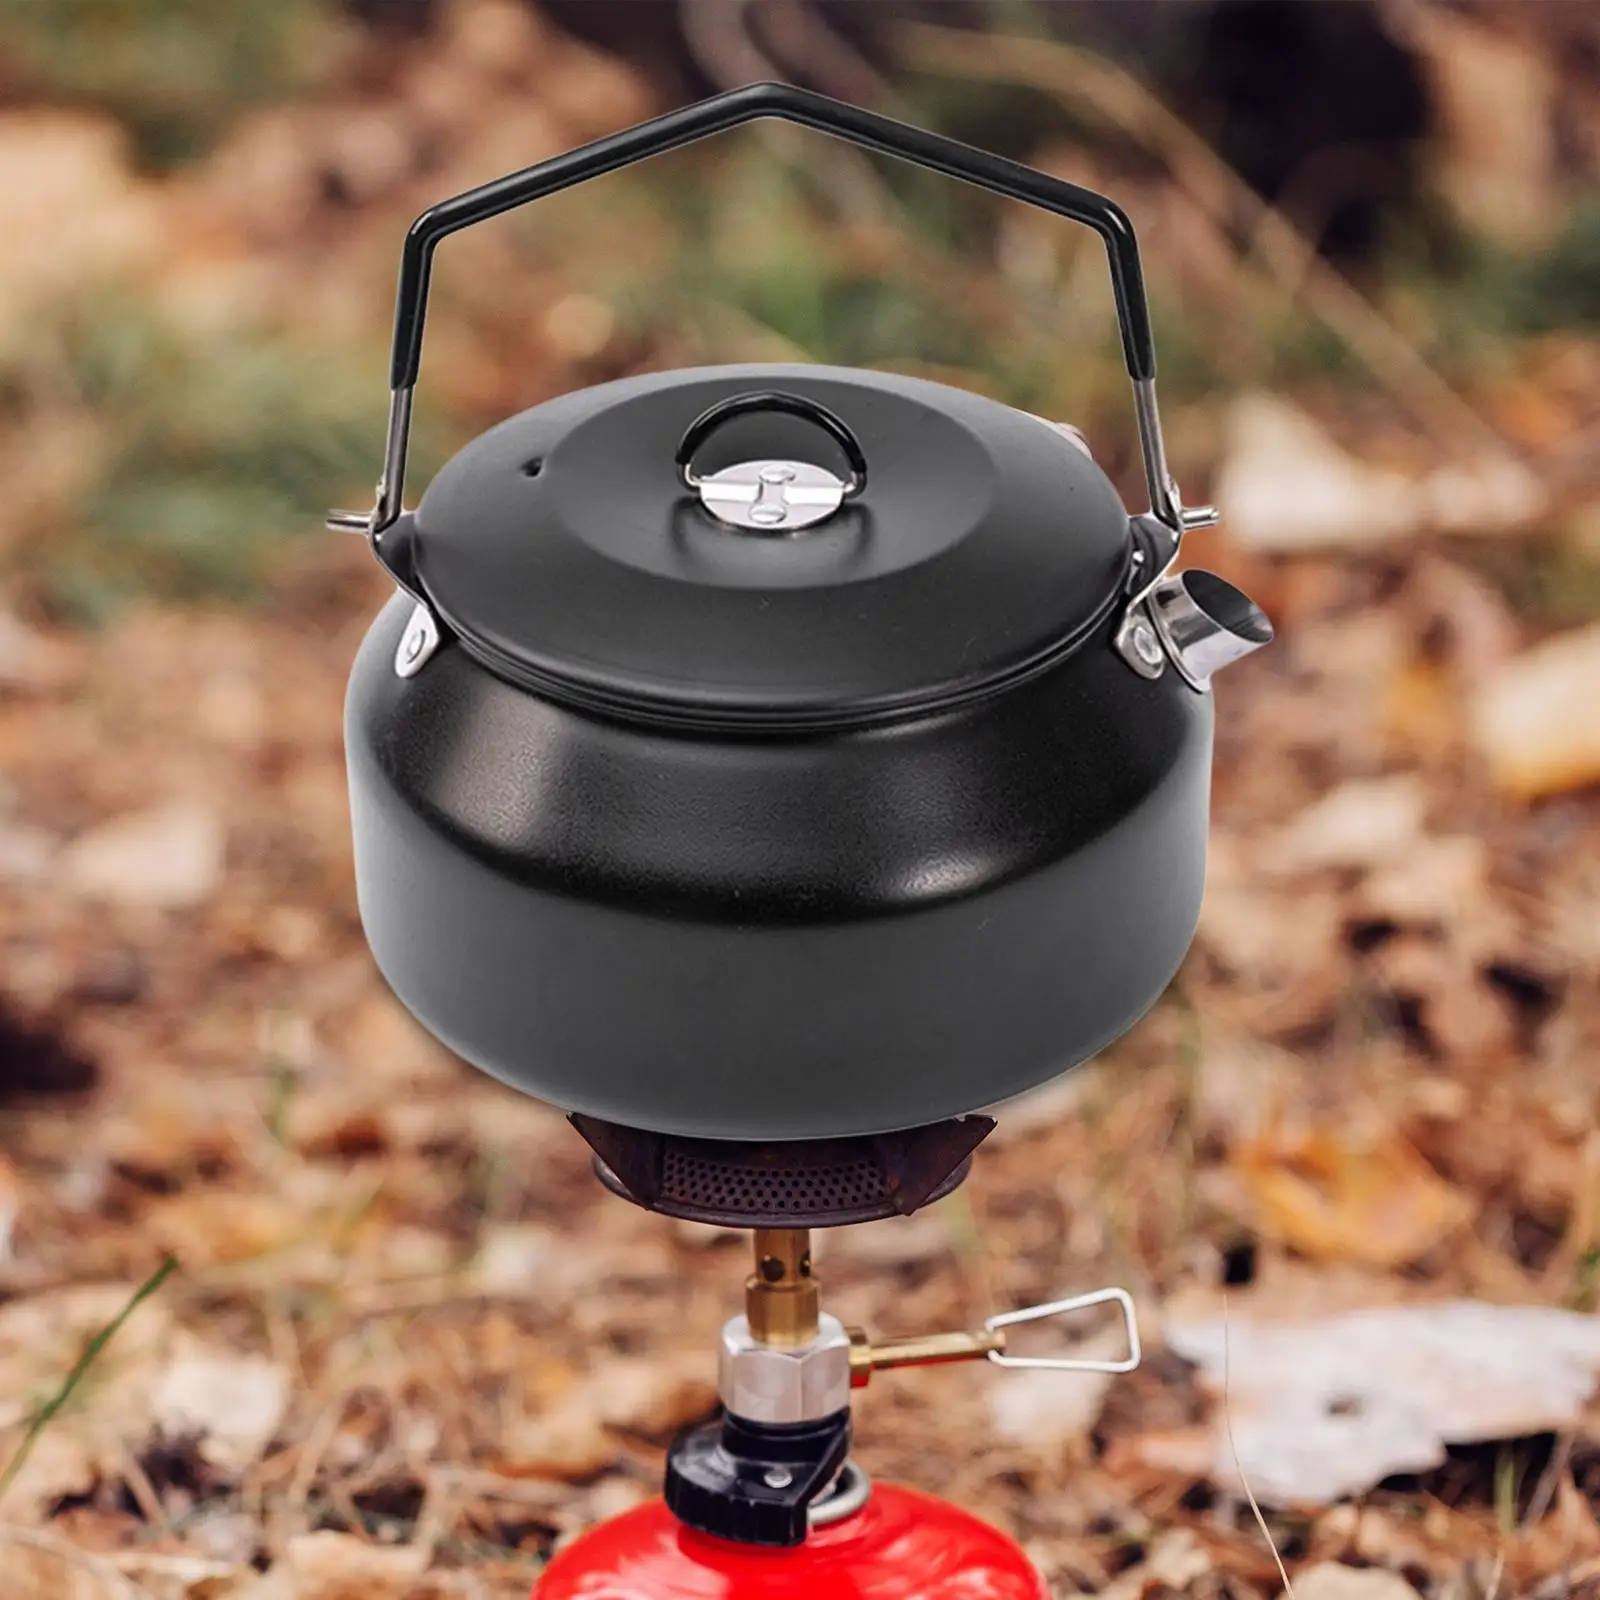 Camping Water Kettle Teapot Kitchen Anti Scald and Lockable Handle Portable Tea Pot for Outdoor Hiking Campfire Travel Barbecue